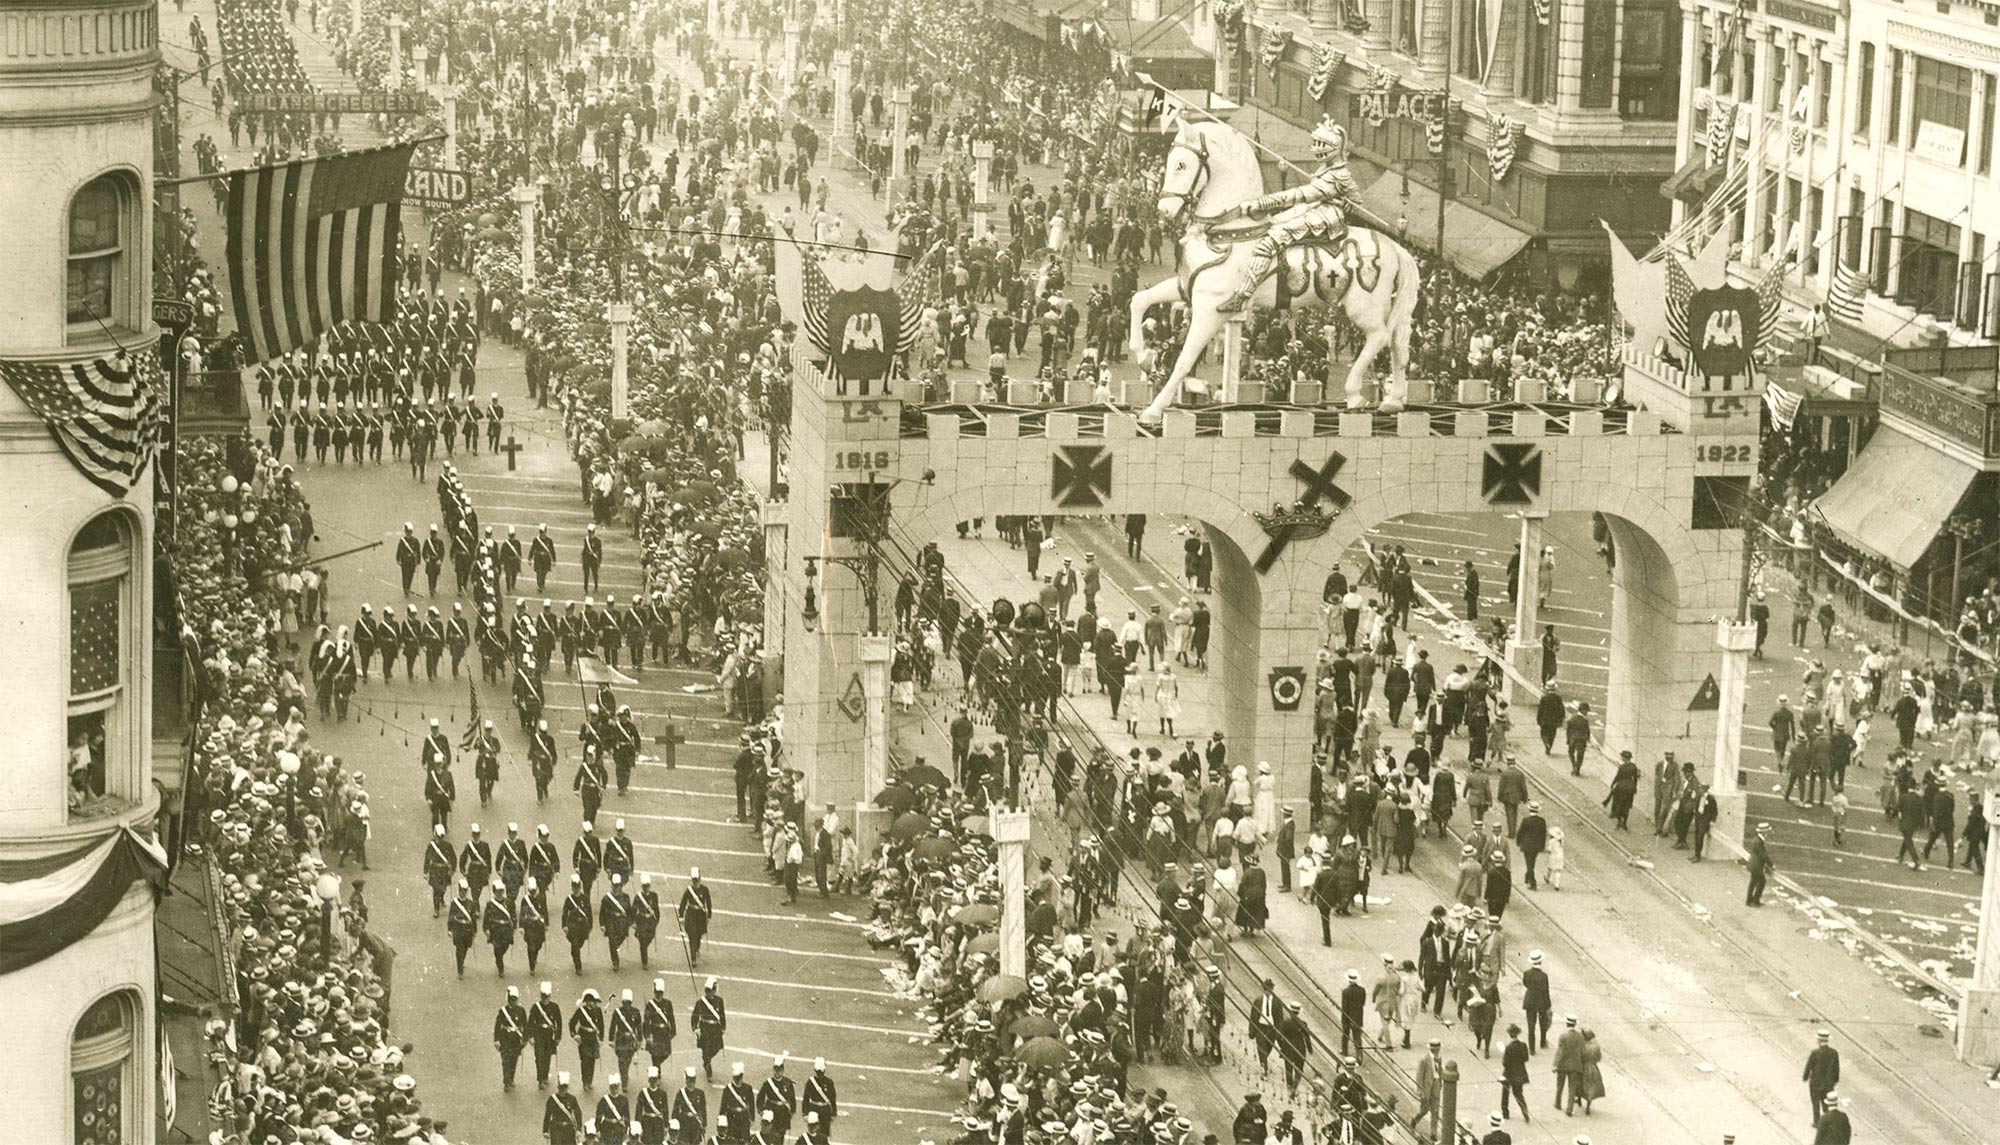 A Masonic parade on Canal Street, downtown New Orleans, ca 1922